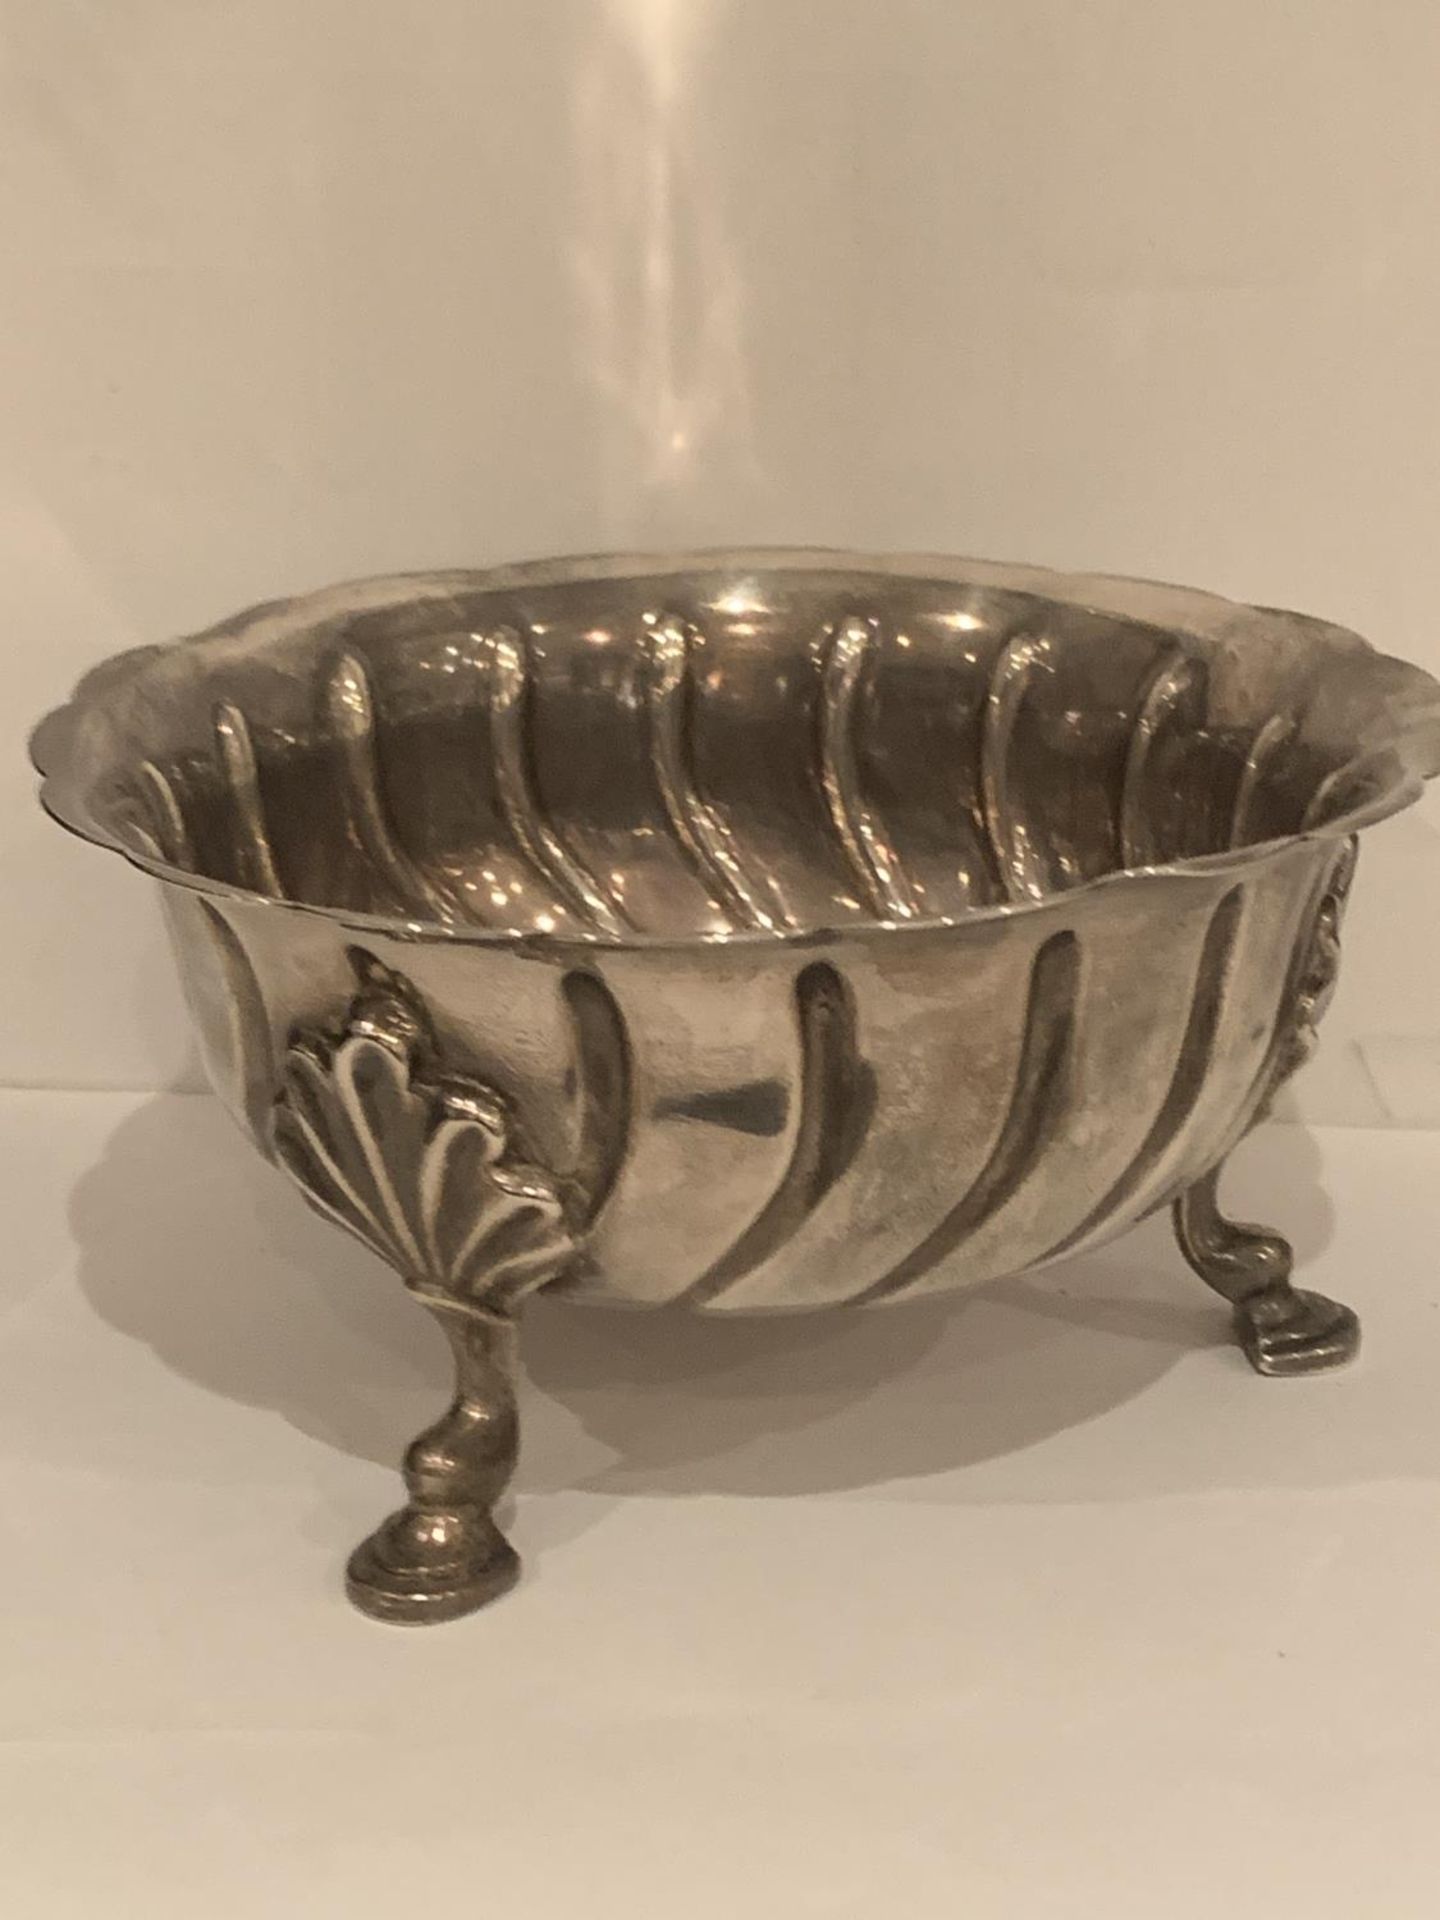 A HALLMARKED LONDON SILVER FOOTED BOWL GROSS WEIGHT 197 GRAMS - Image 3 of 5